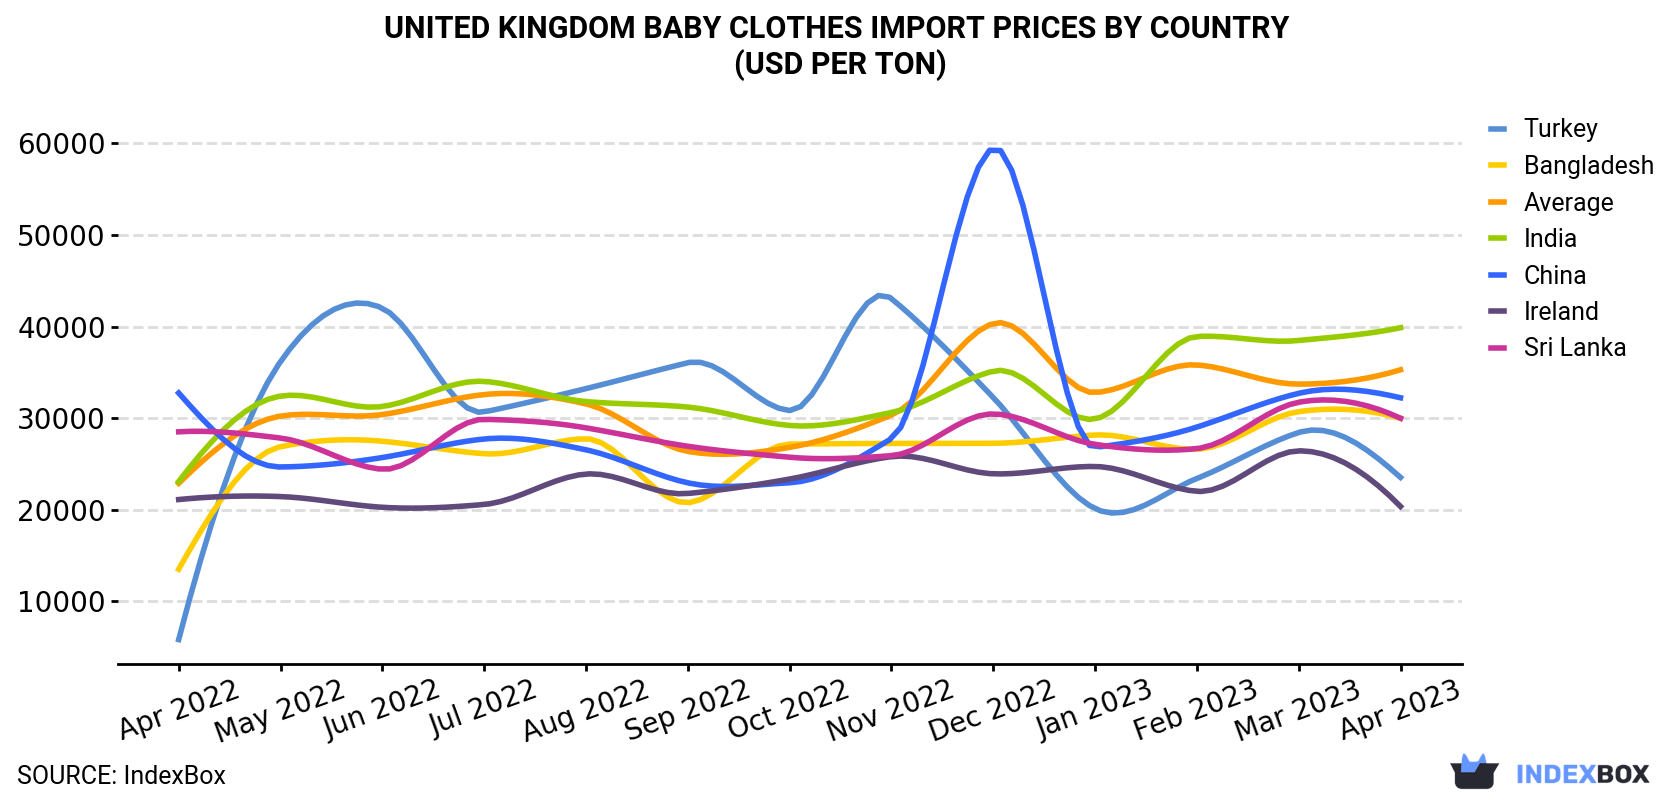 United Kingdom Baby Clothes Import Prices By Country (USD Per Ton)